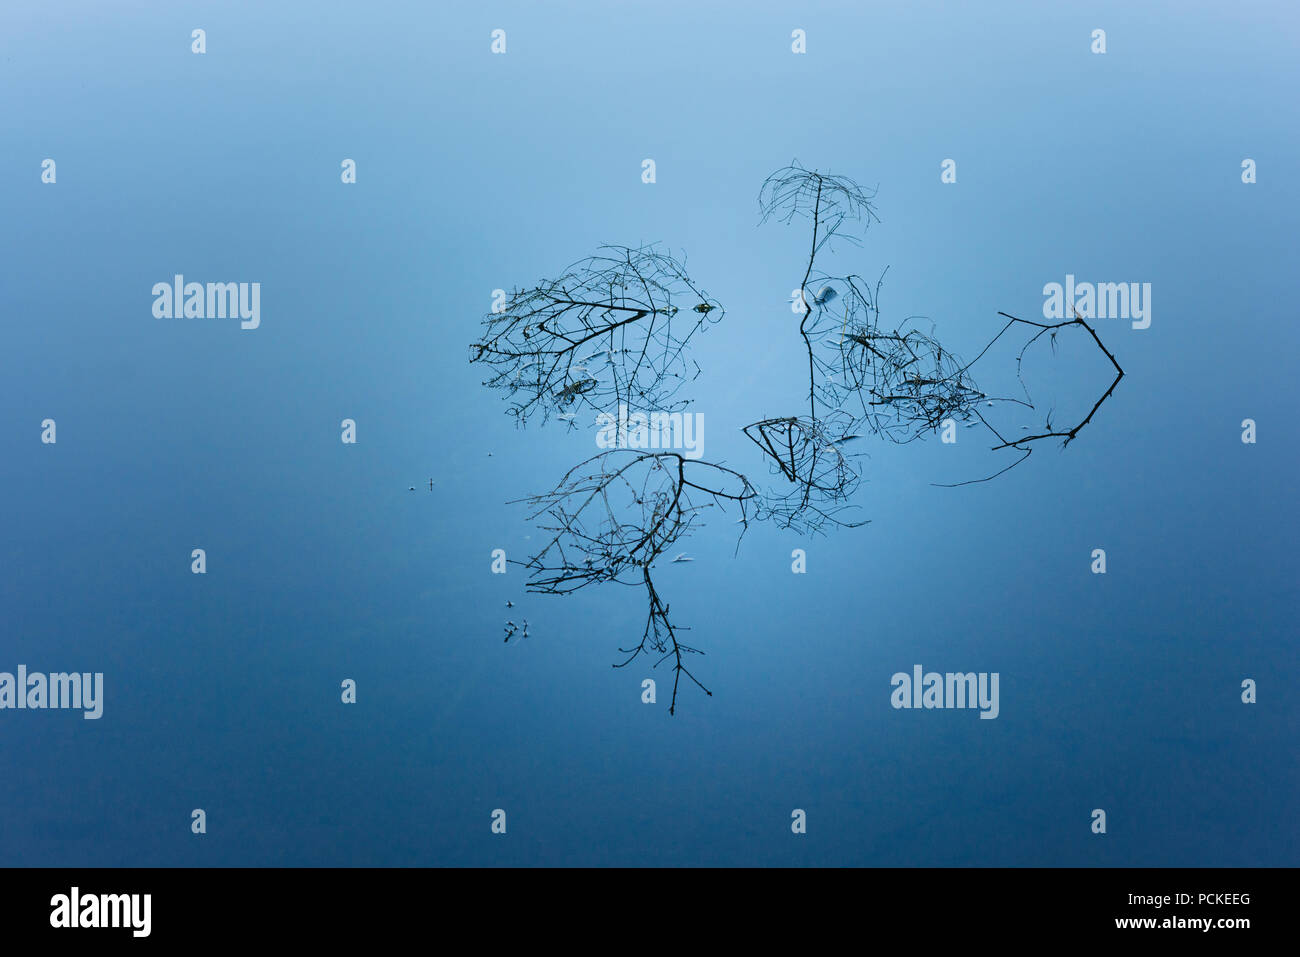 calm seawater with branches Stock Photo